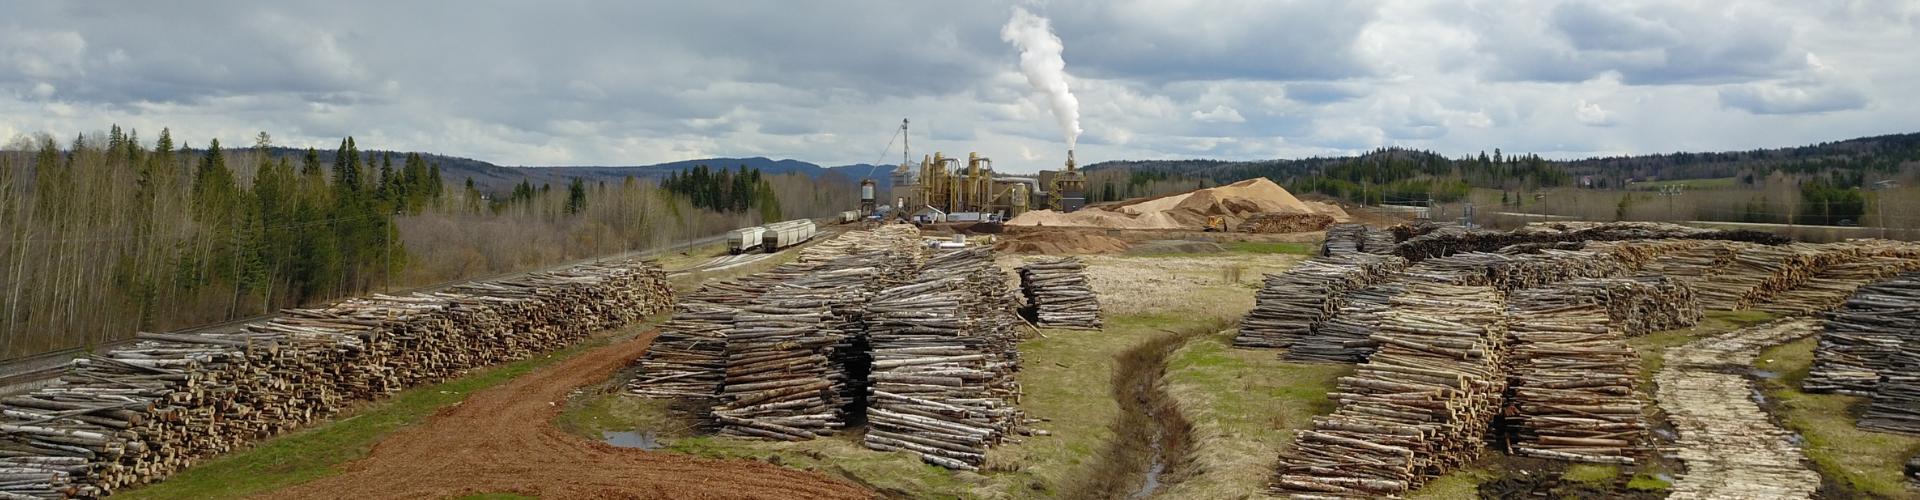 Drax' Medowbank pellet plant and log yard in Northern B.C. close to Quesnel full of whole trees about to be turned into pellets